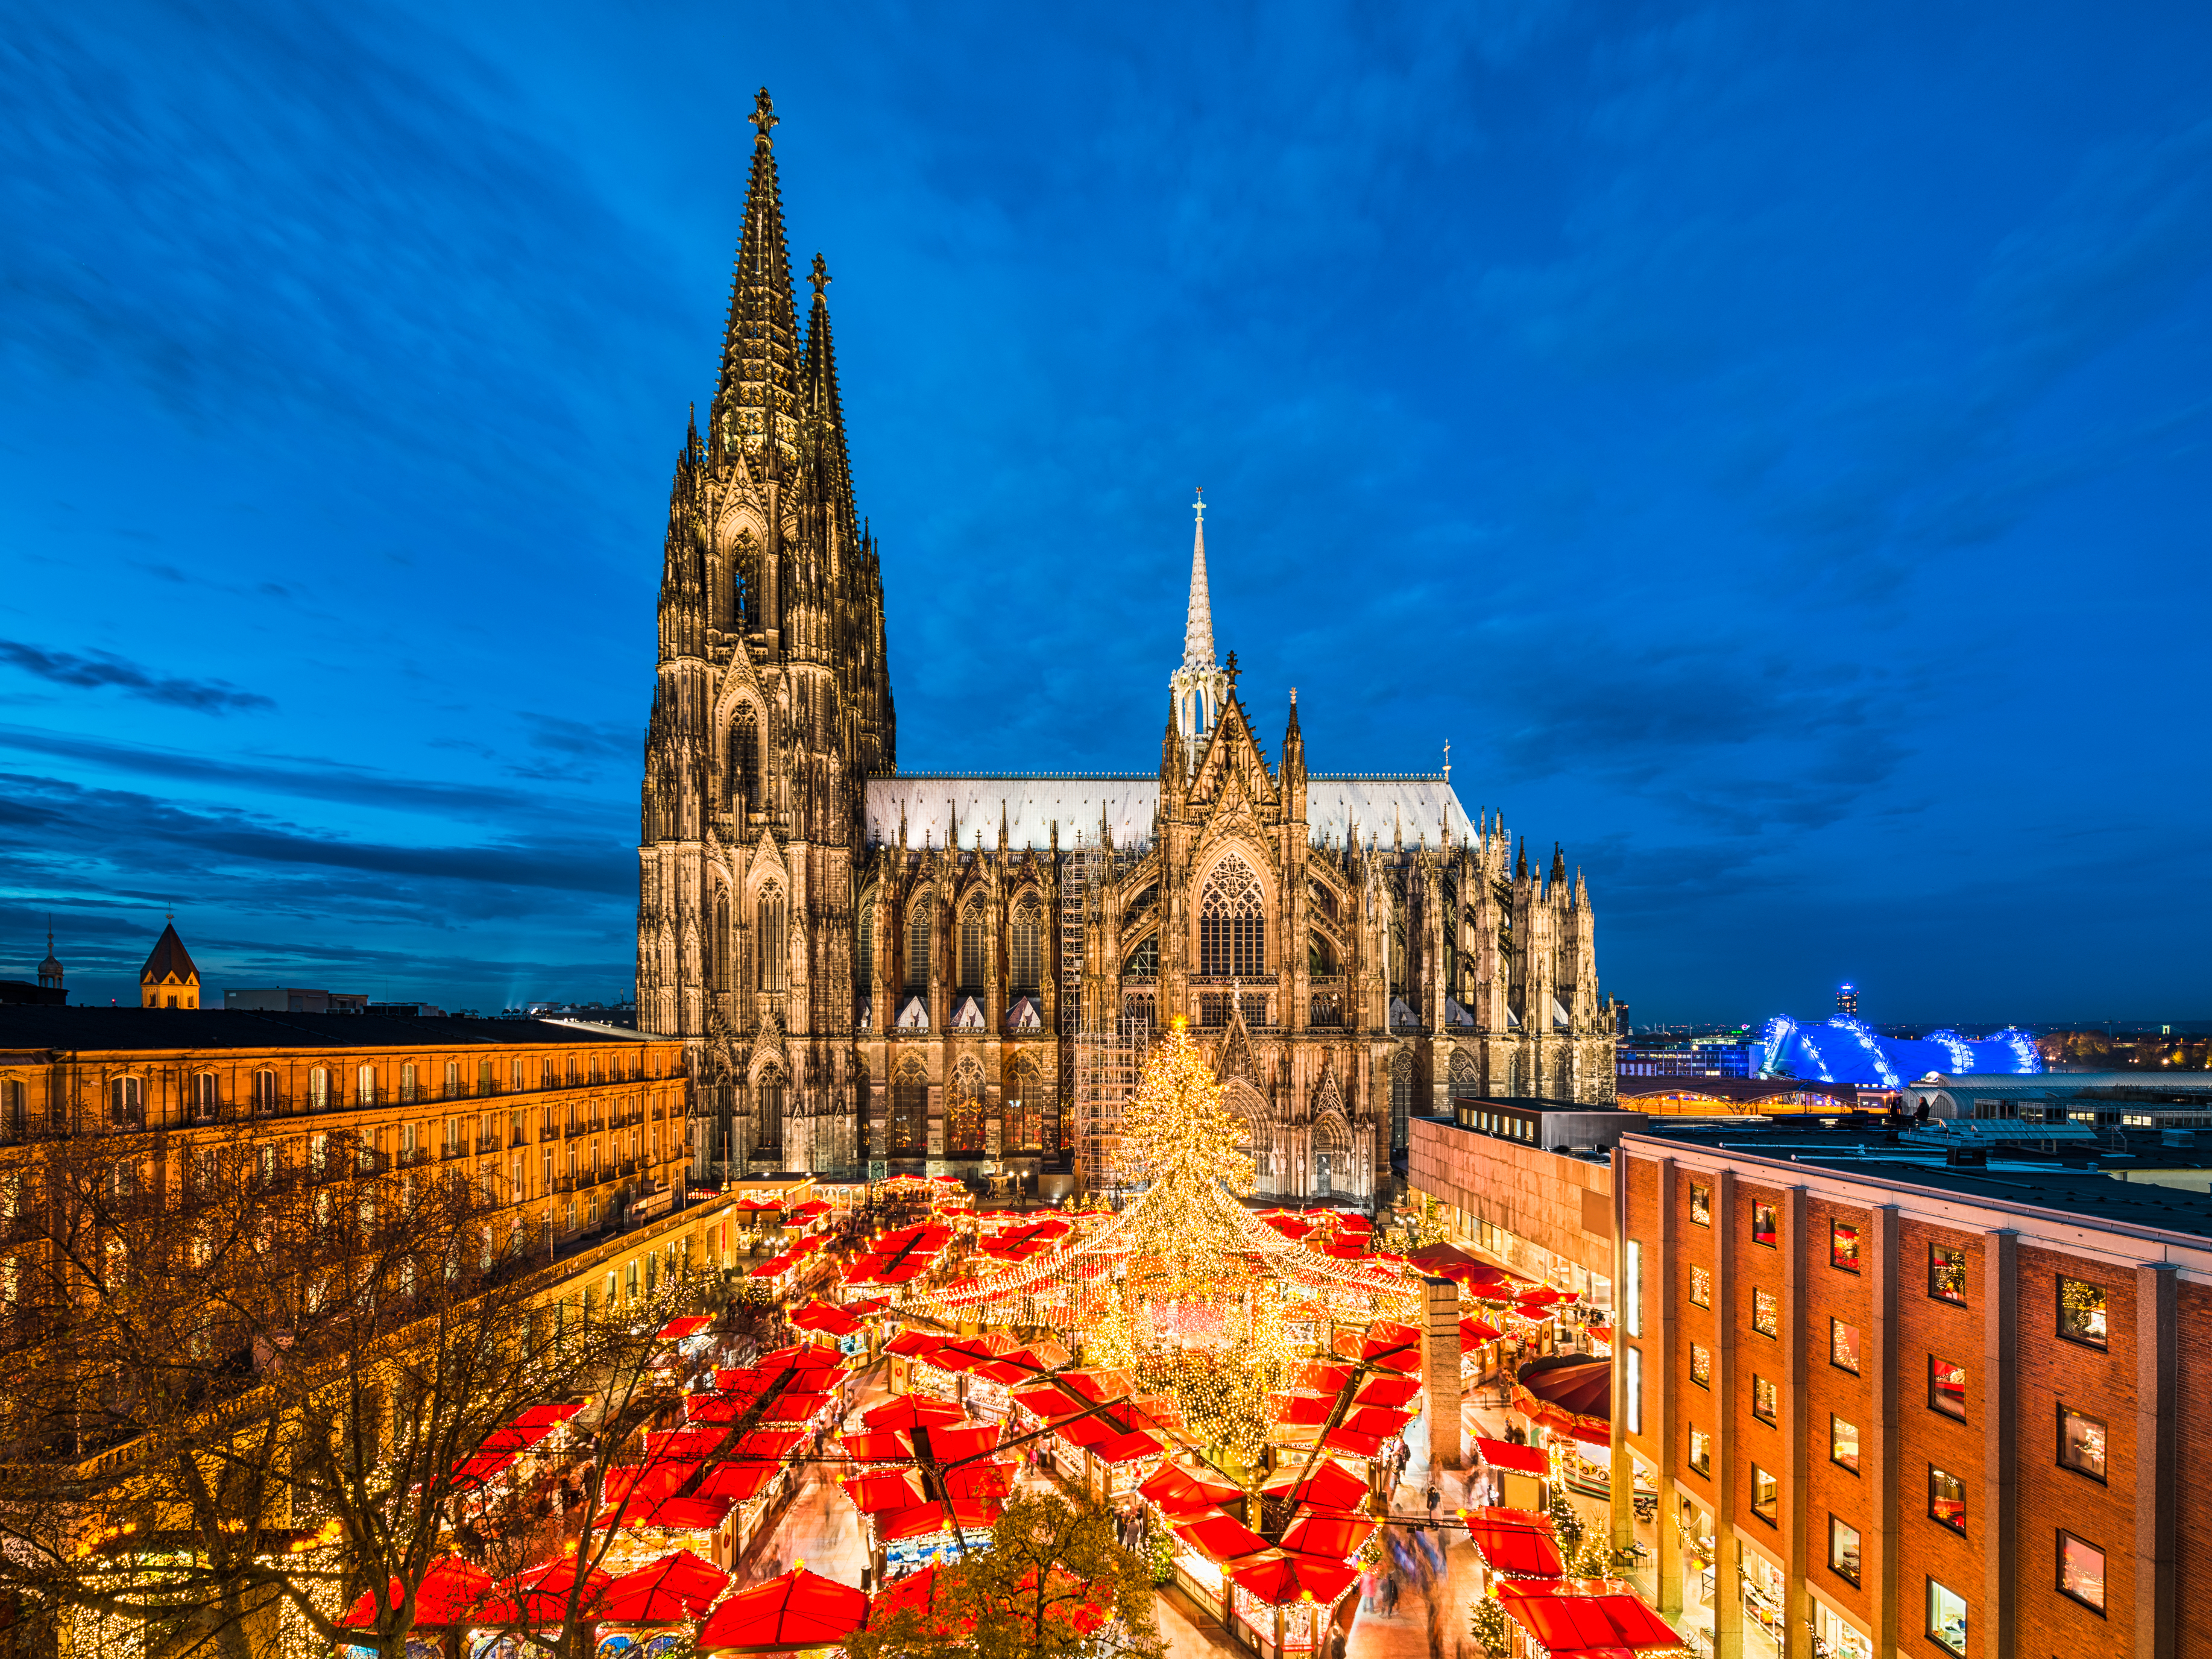 View of the Cologne Christmas market with the Cologne cathedral as a backdrop at dusk.